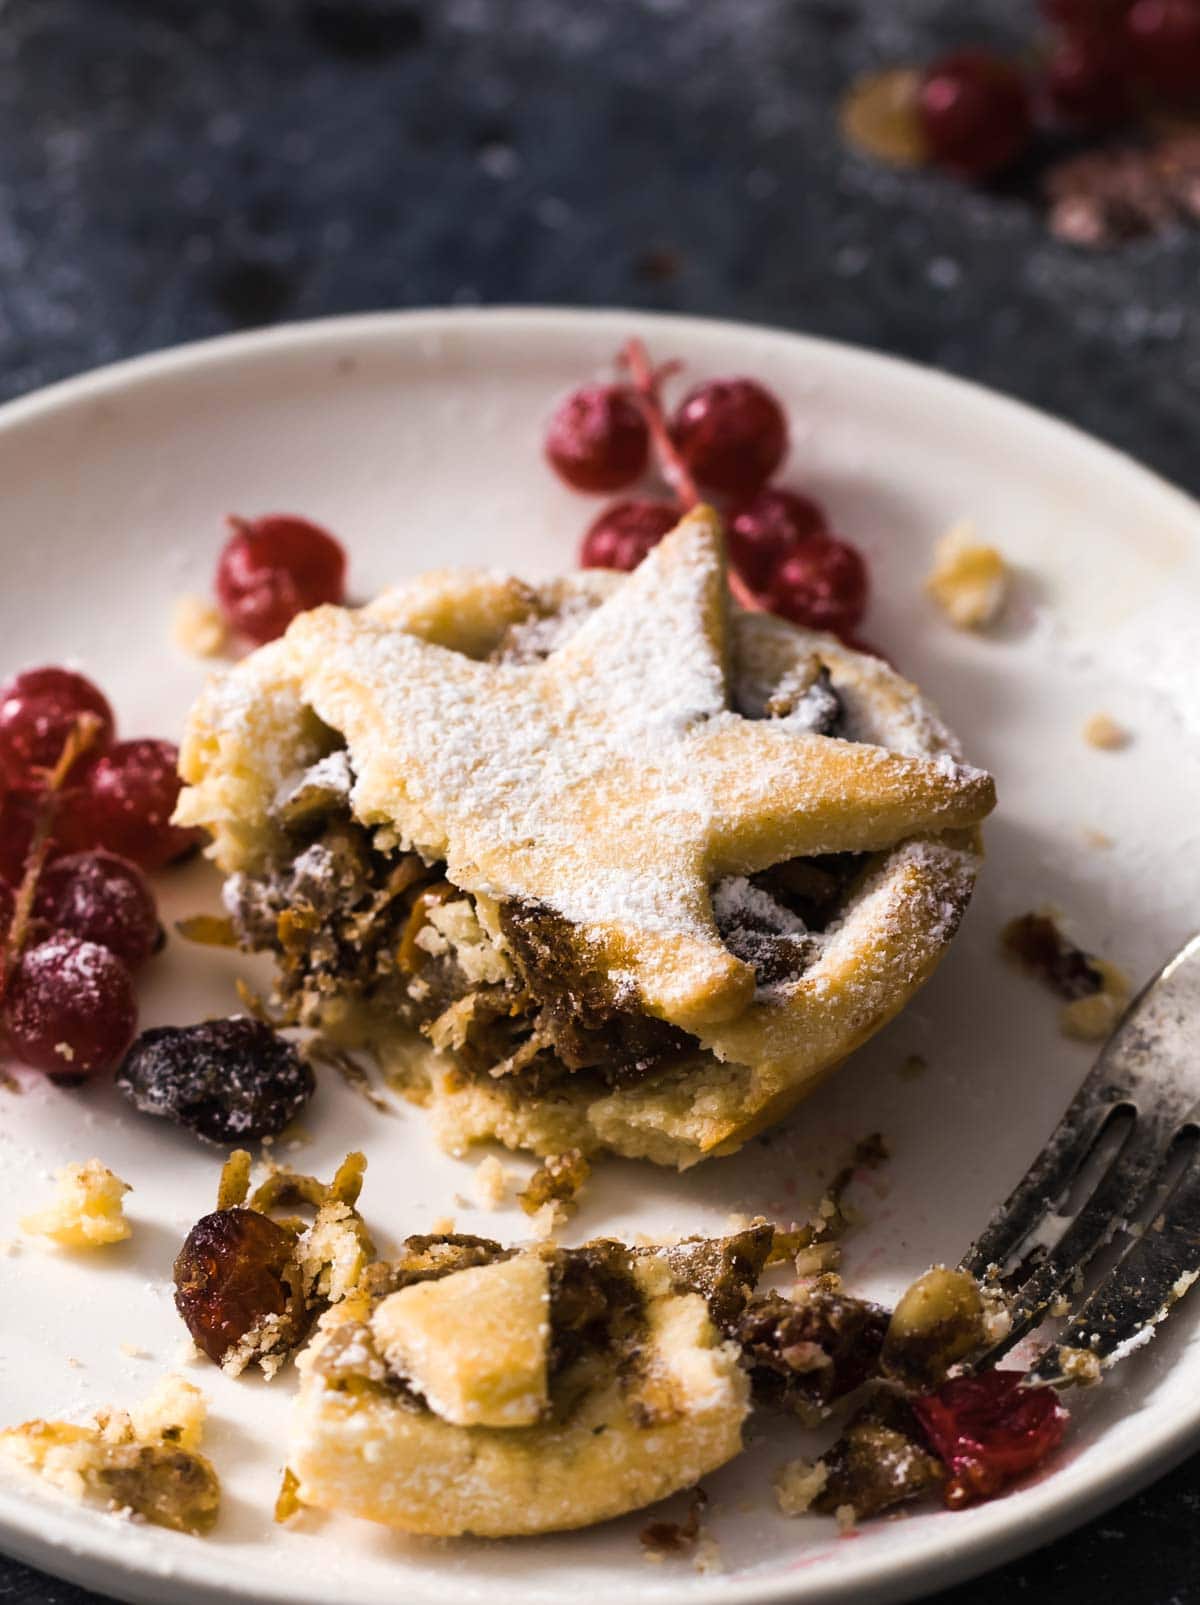 a mince pie on a plate with a bite taken out by a fork